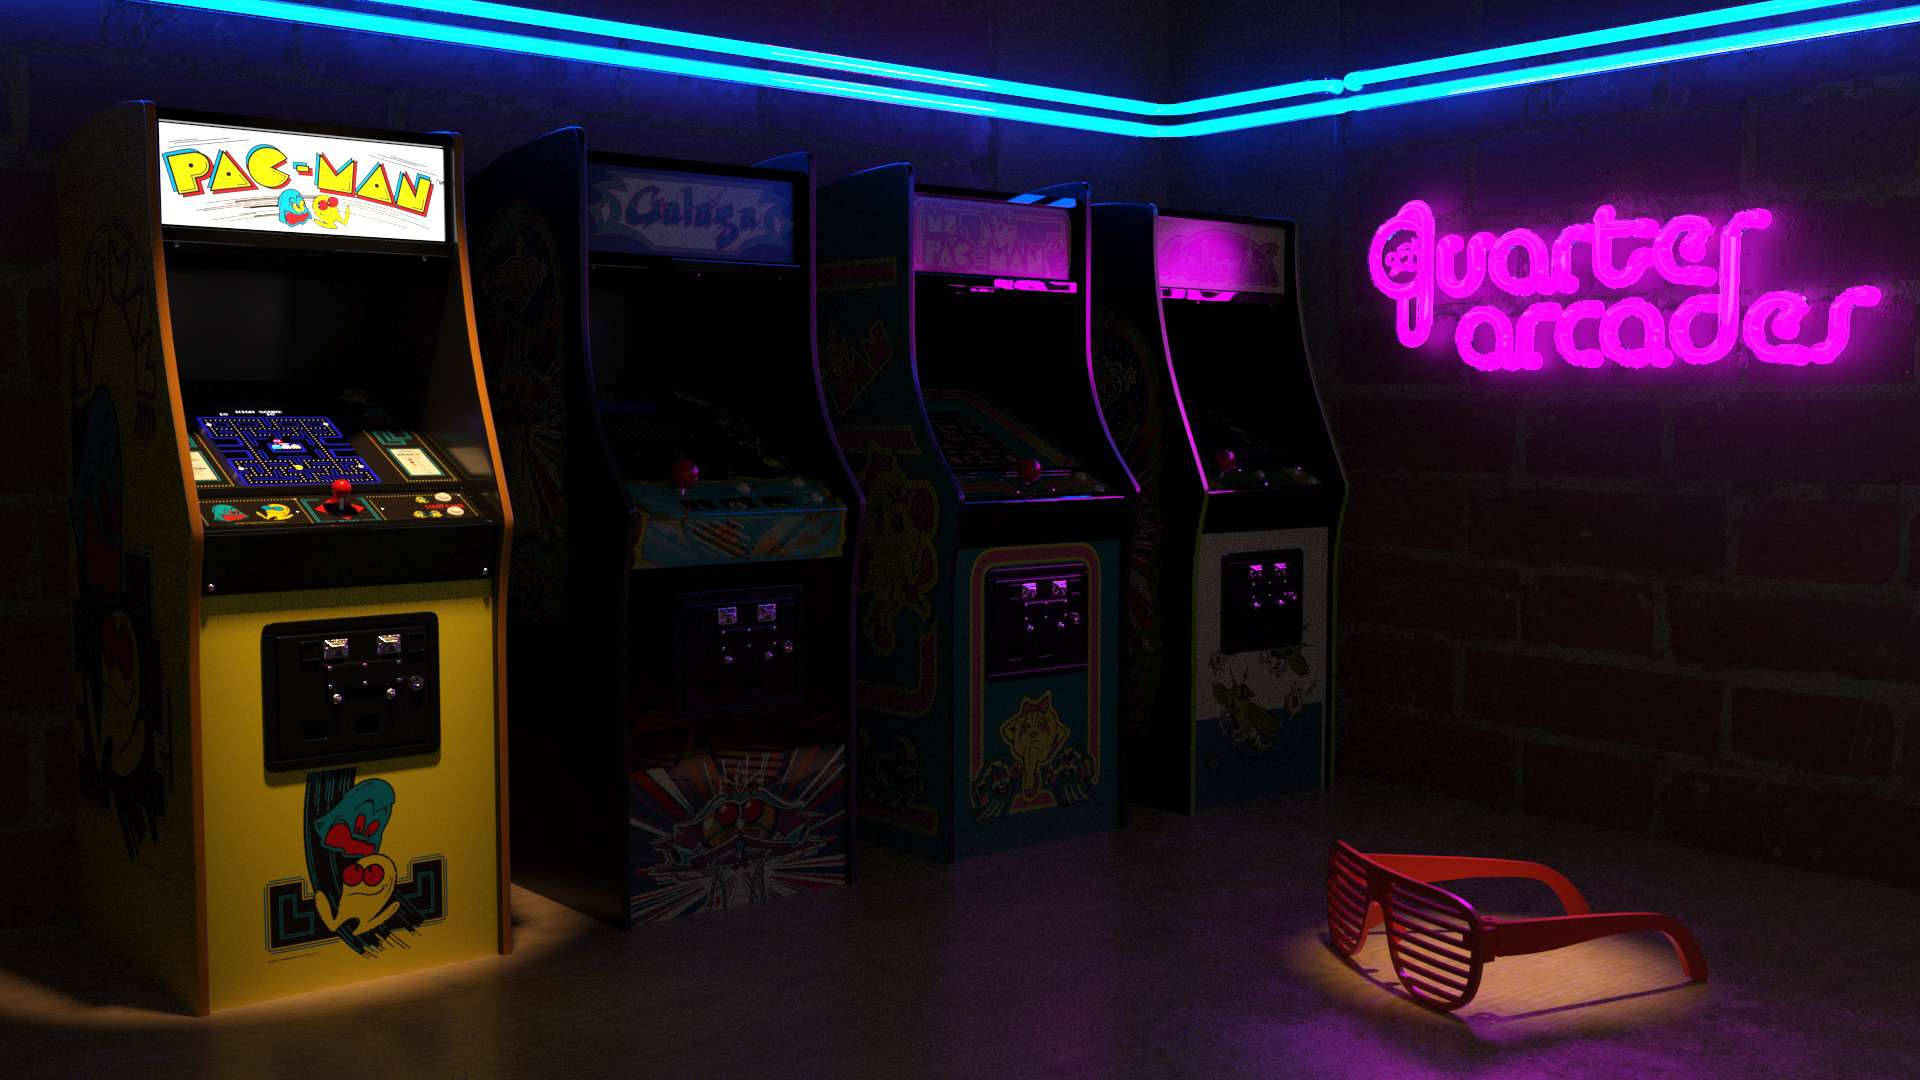 Relive The Joy Of Classic Arcade Games! Wallpaper